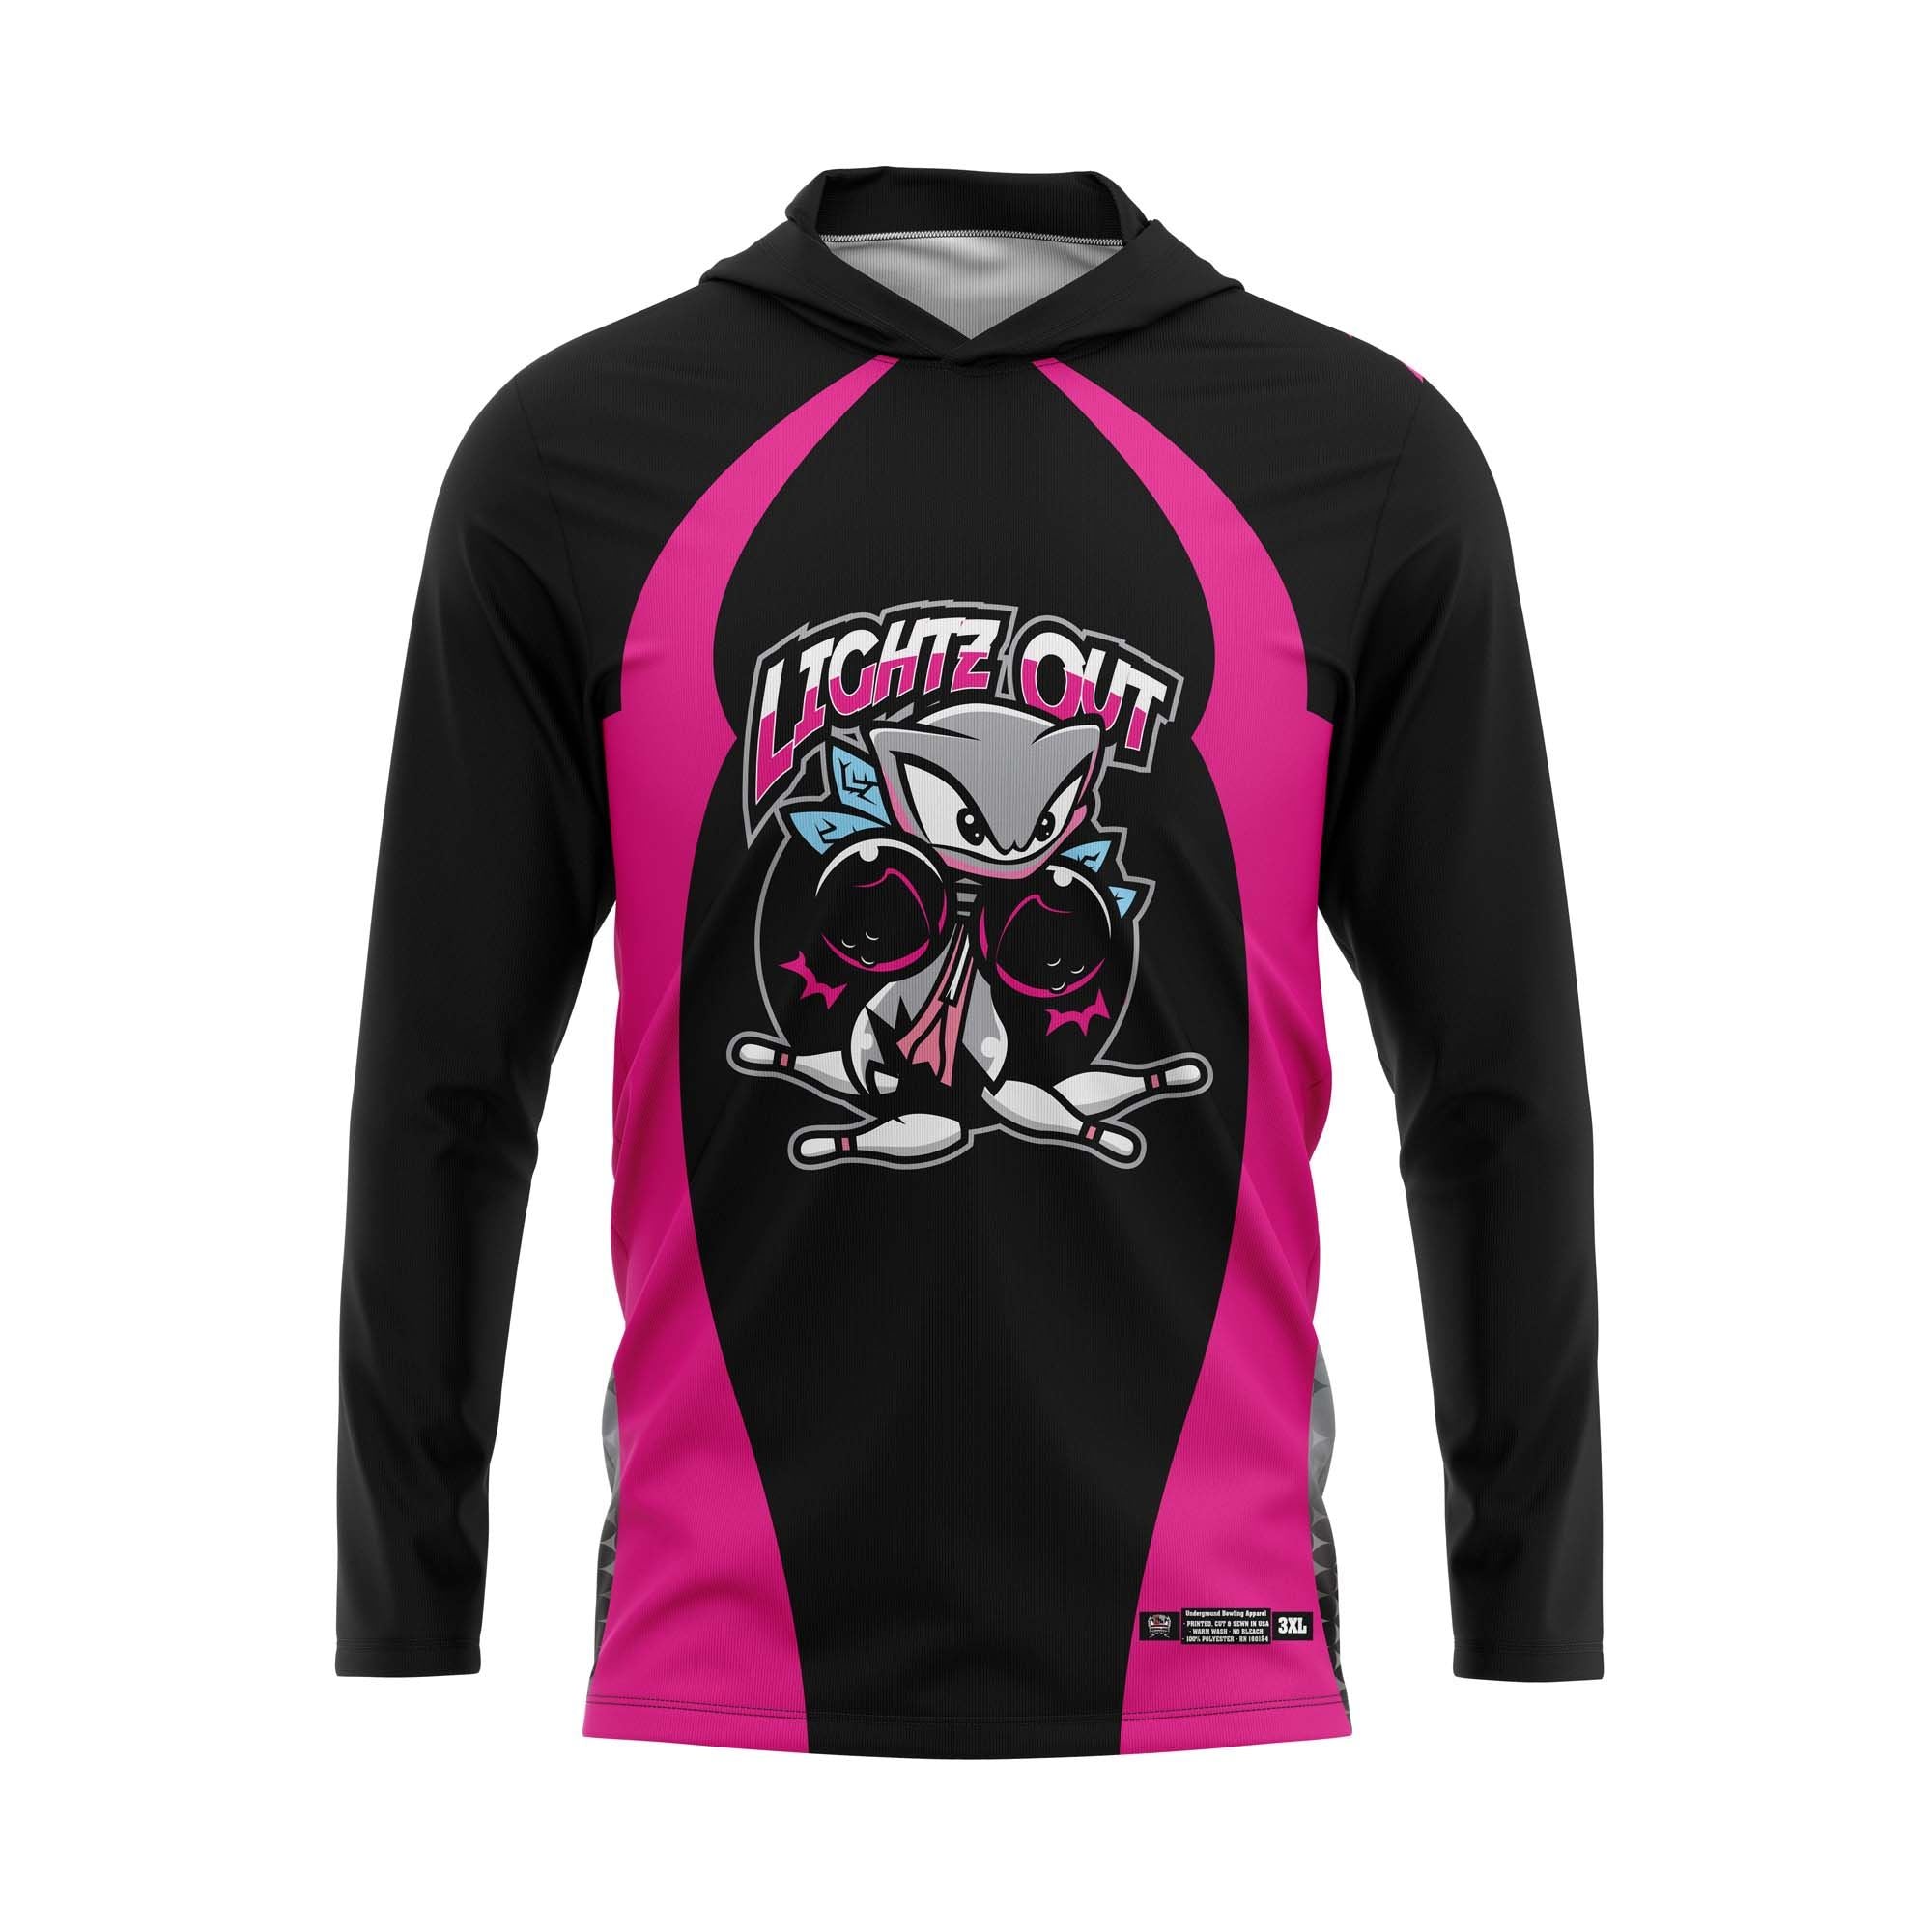 Lightz Out Breast Cancer Jersey